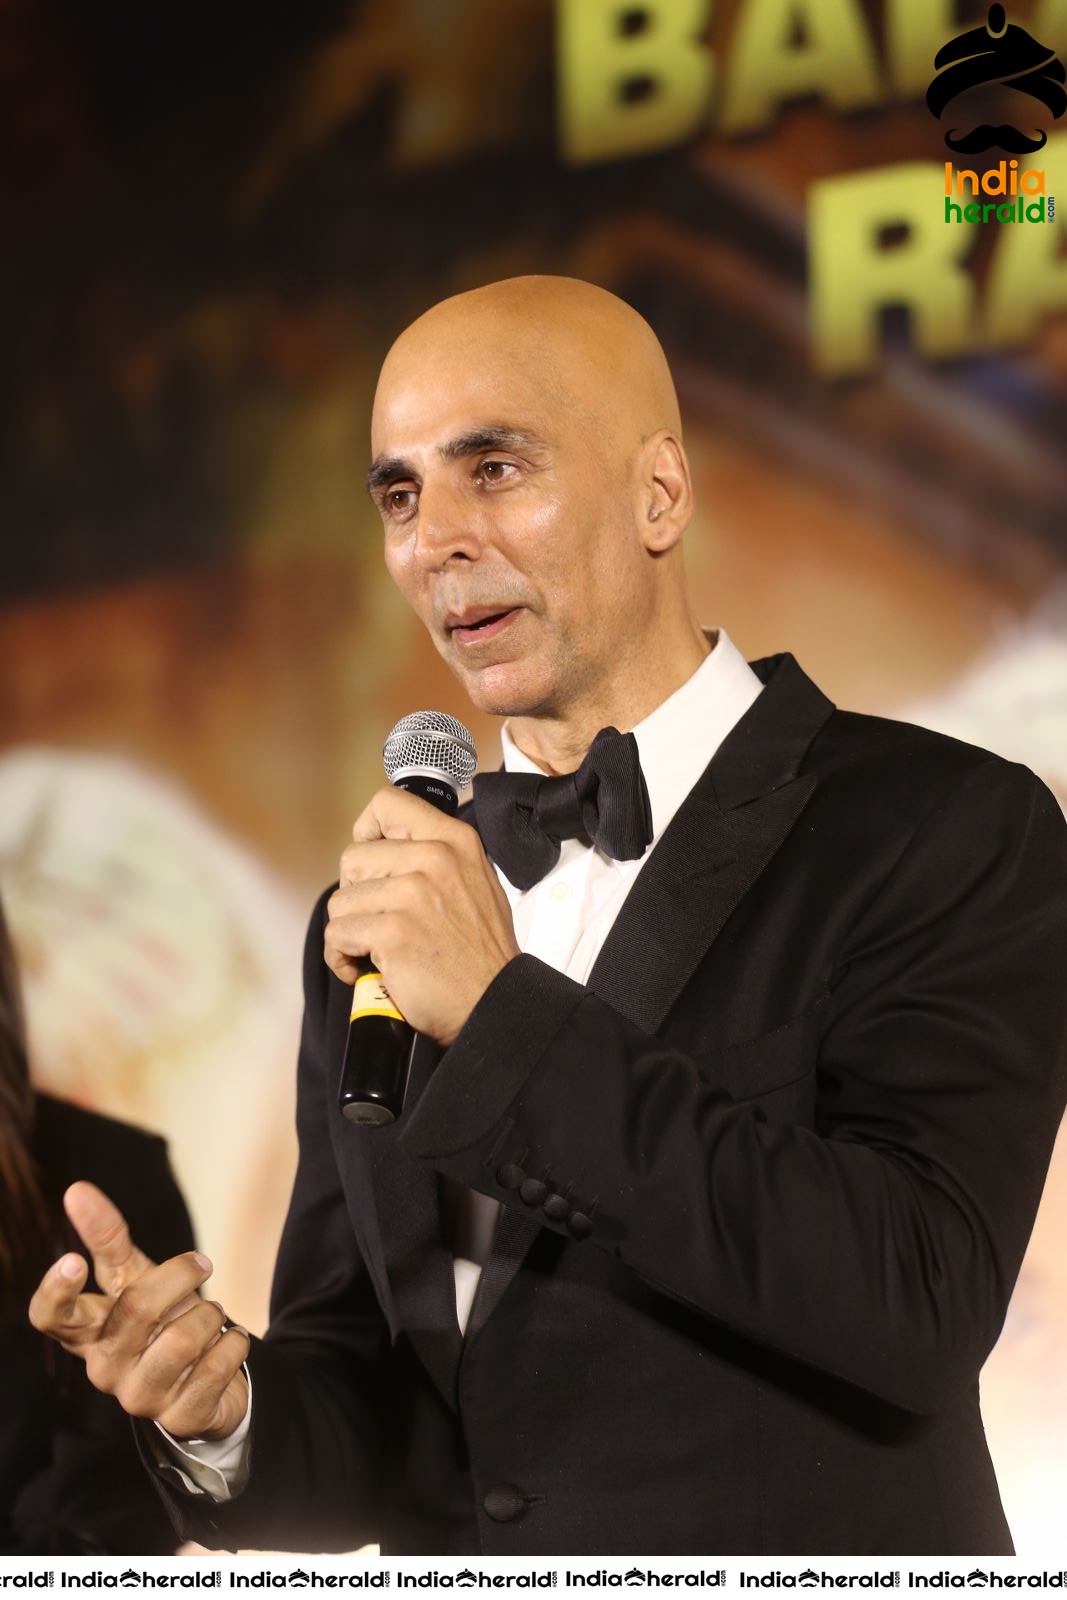 Akshay Kumar seen with Fully Tonsured Head at an event Set 3